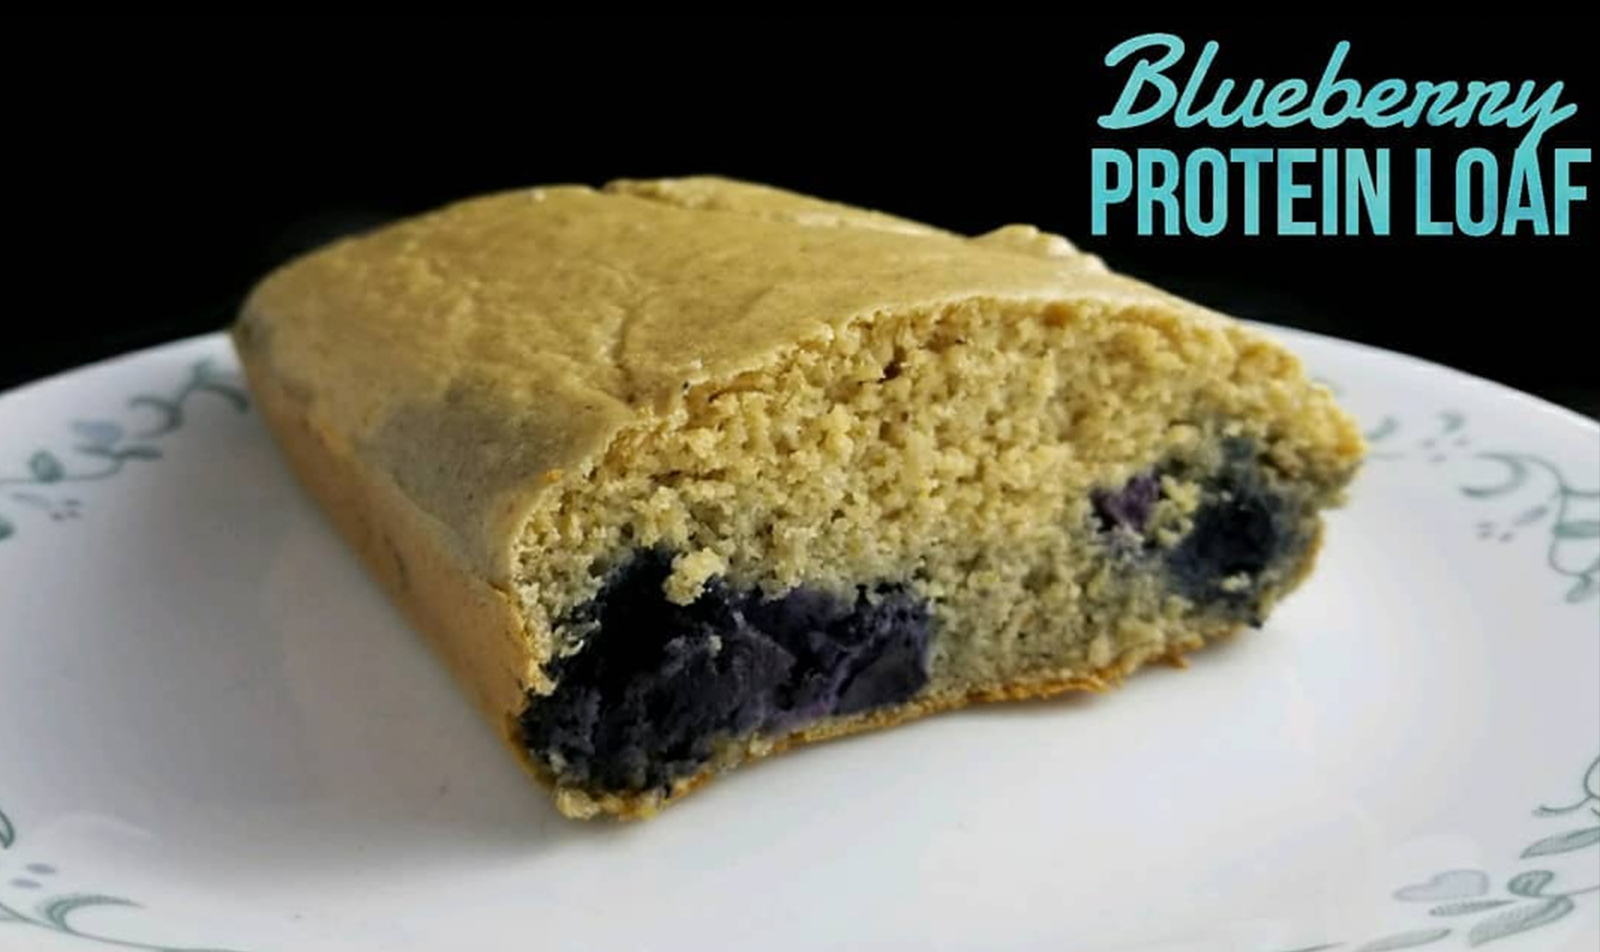 Blueberry Protein Loaf | BioX Performance Nutrition